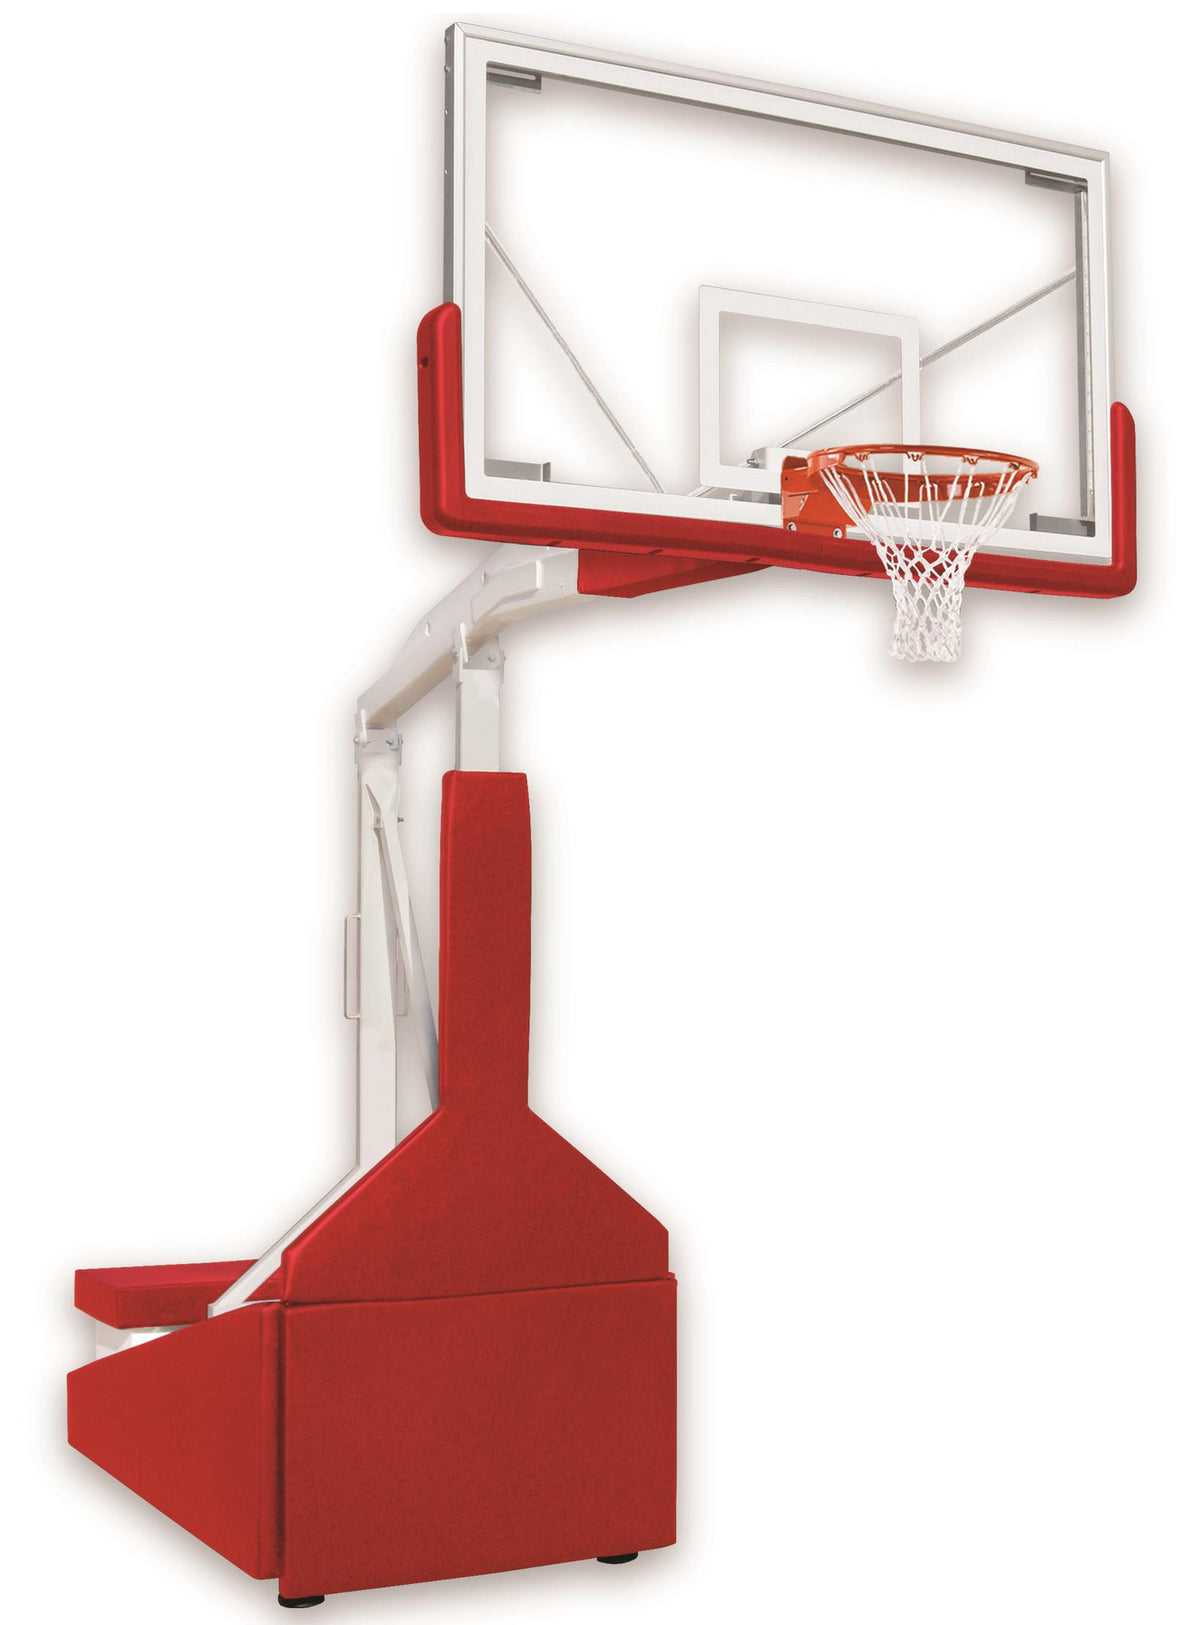 First Team Tempest Triumph Portable Adjustable Basketball Hoop 72 inch Tempered-Glass